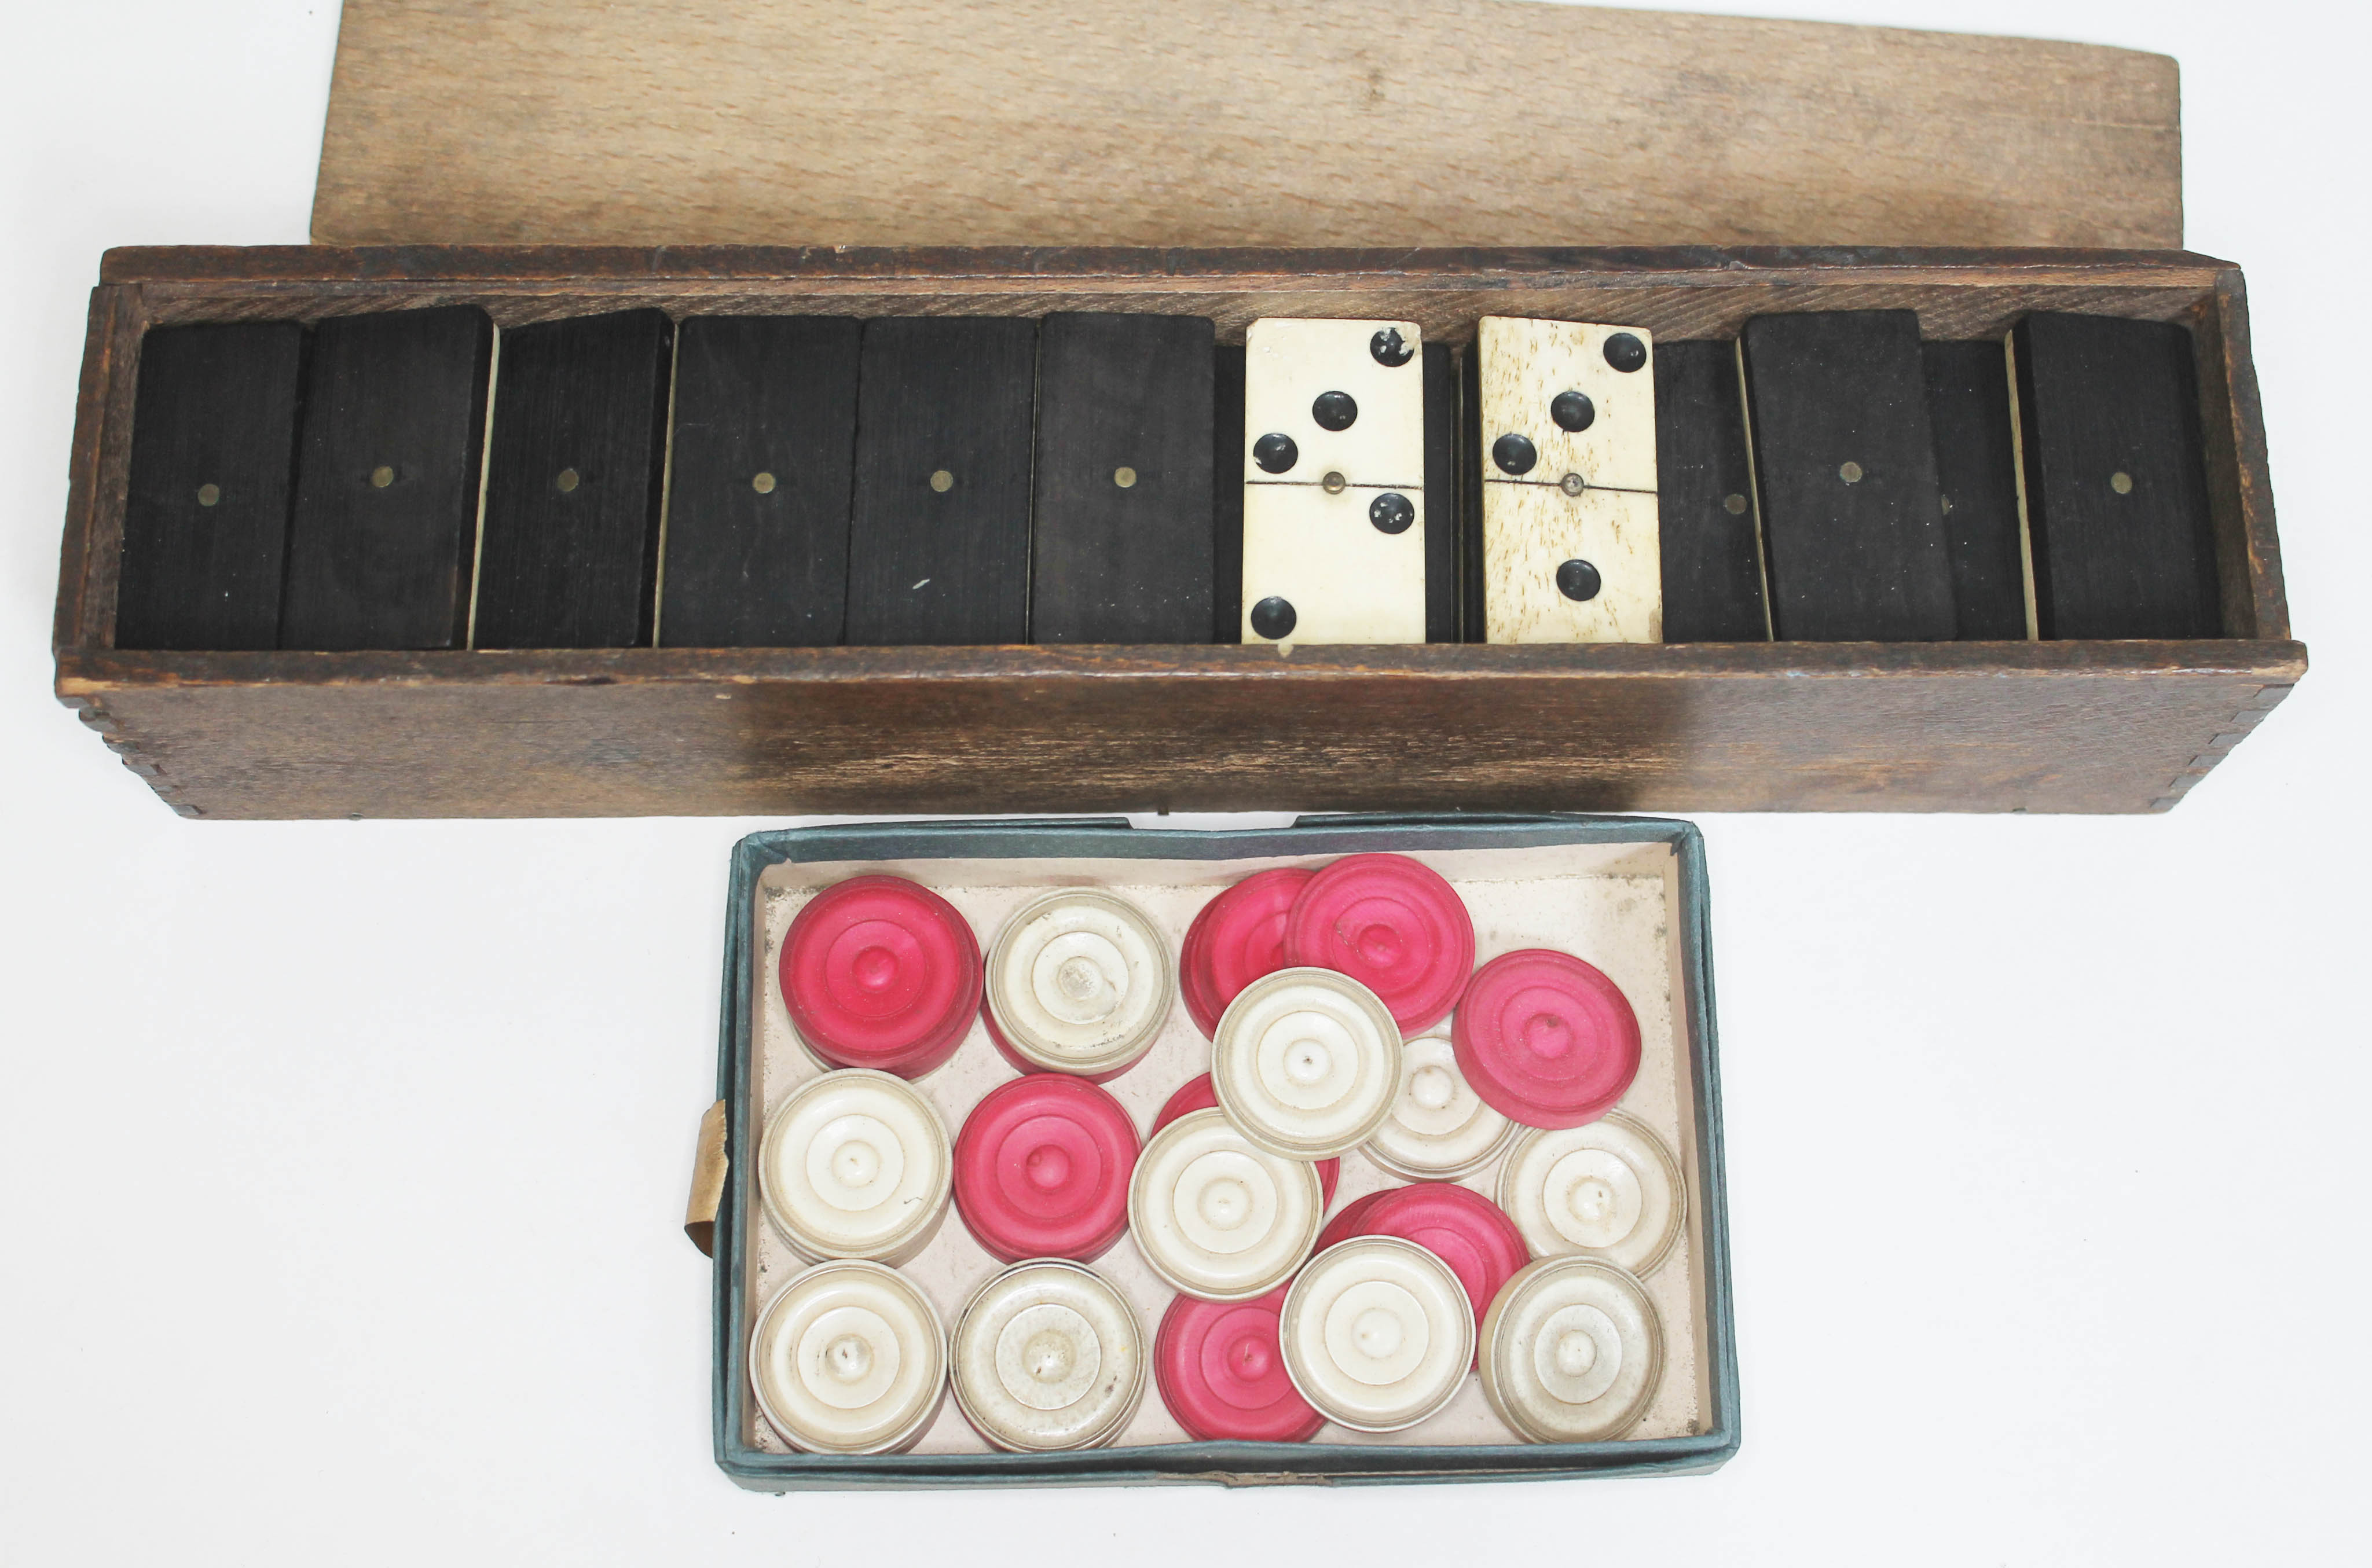 A set of Victorian carved ivory draughts pieces and a set of bone and ebony double nine dominoes